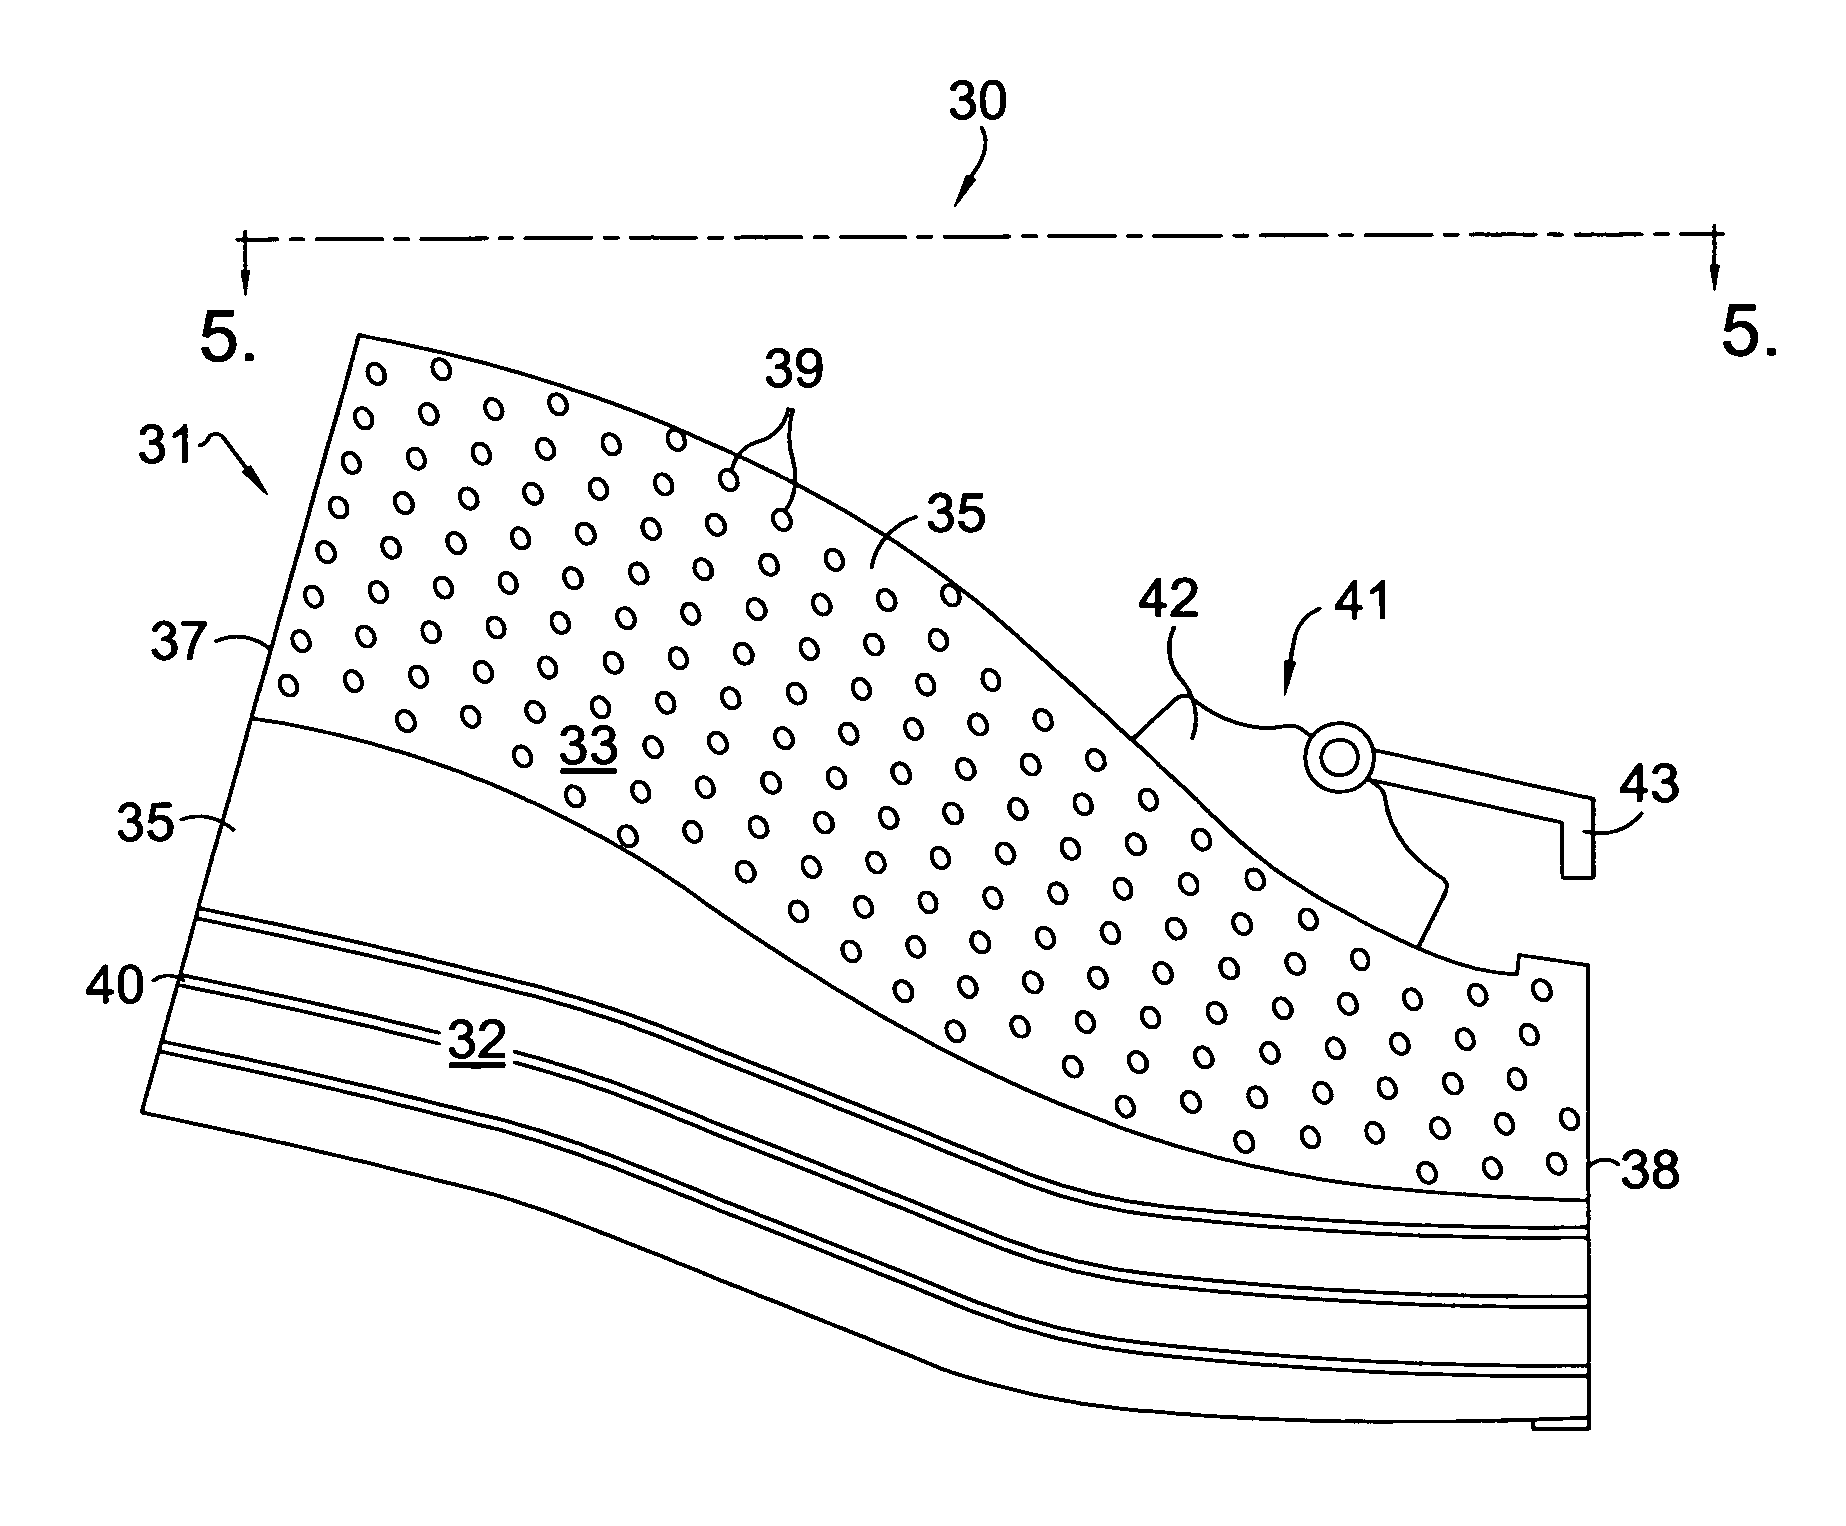 Transition duct apparatus having reduced pressure loss